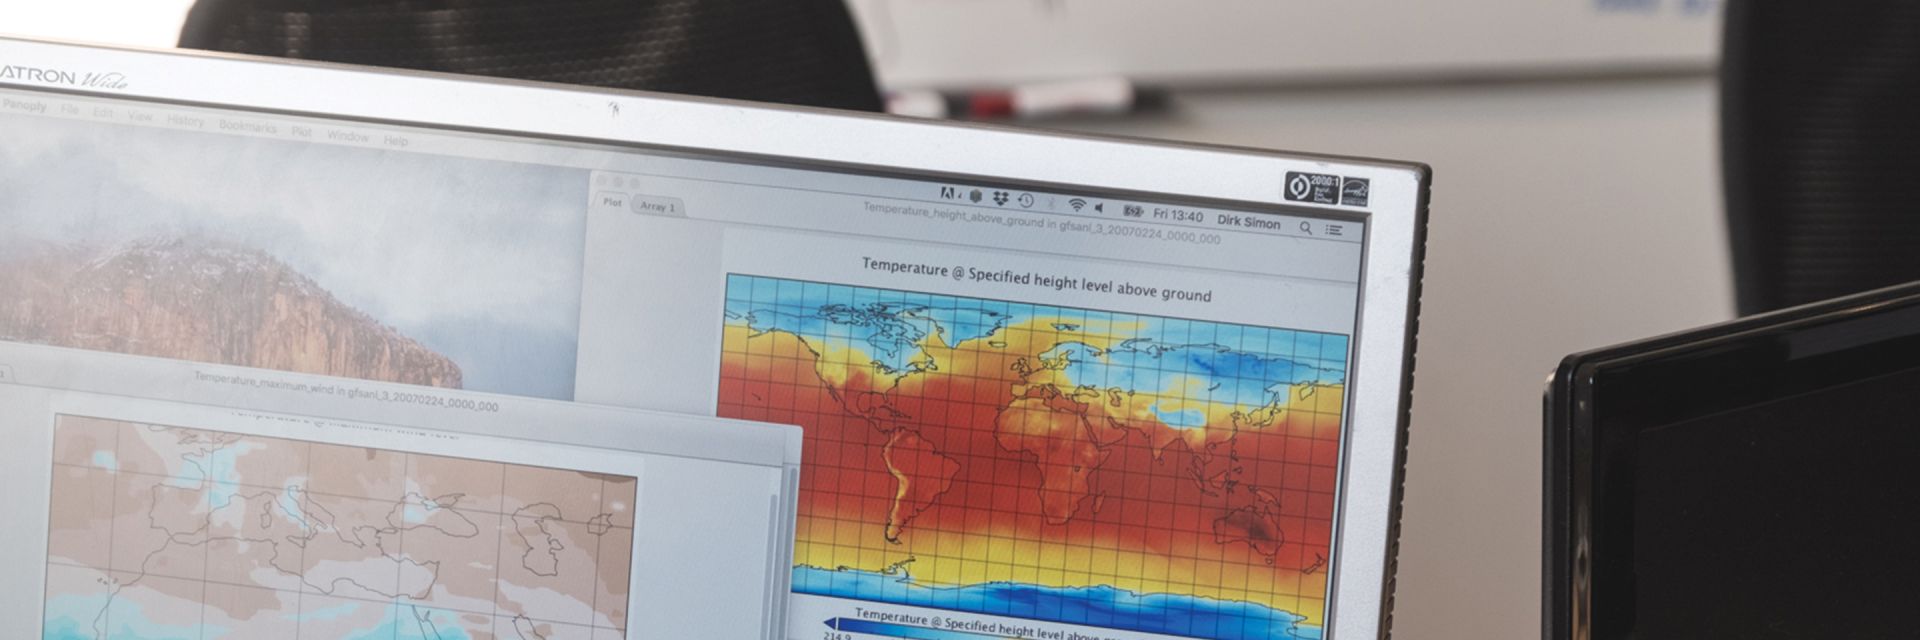 A corner of a computer screen displaying temperature data patterns across a map of the world